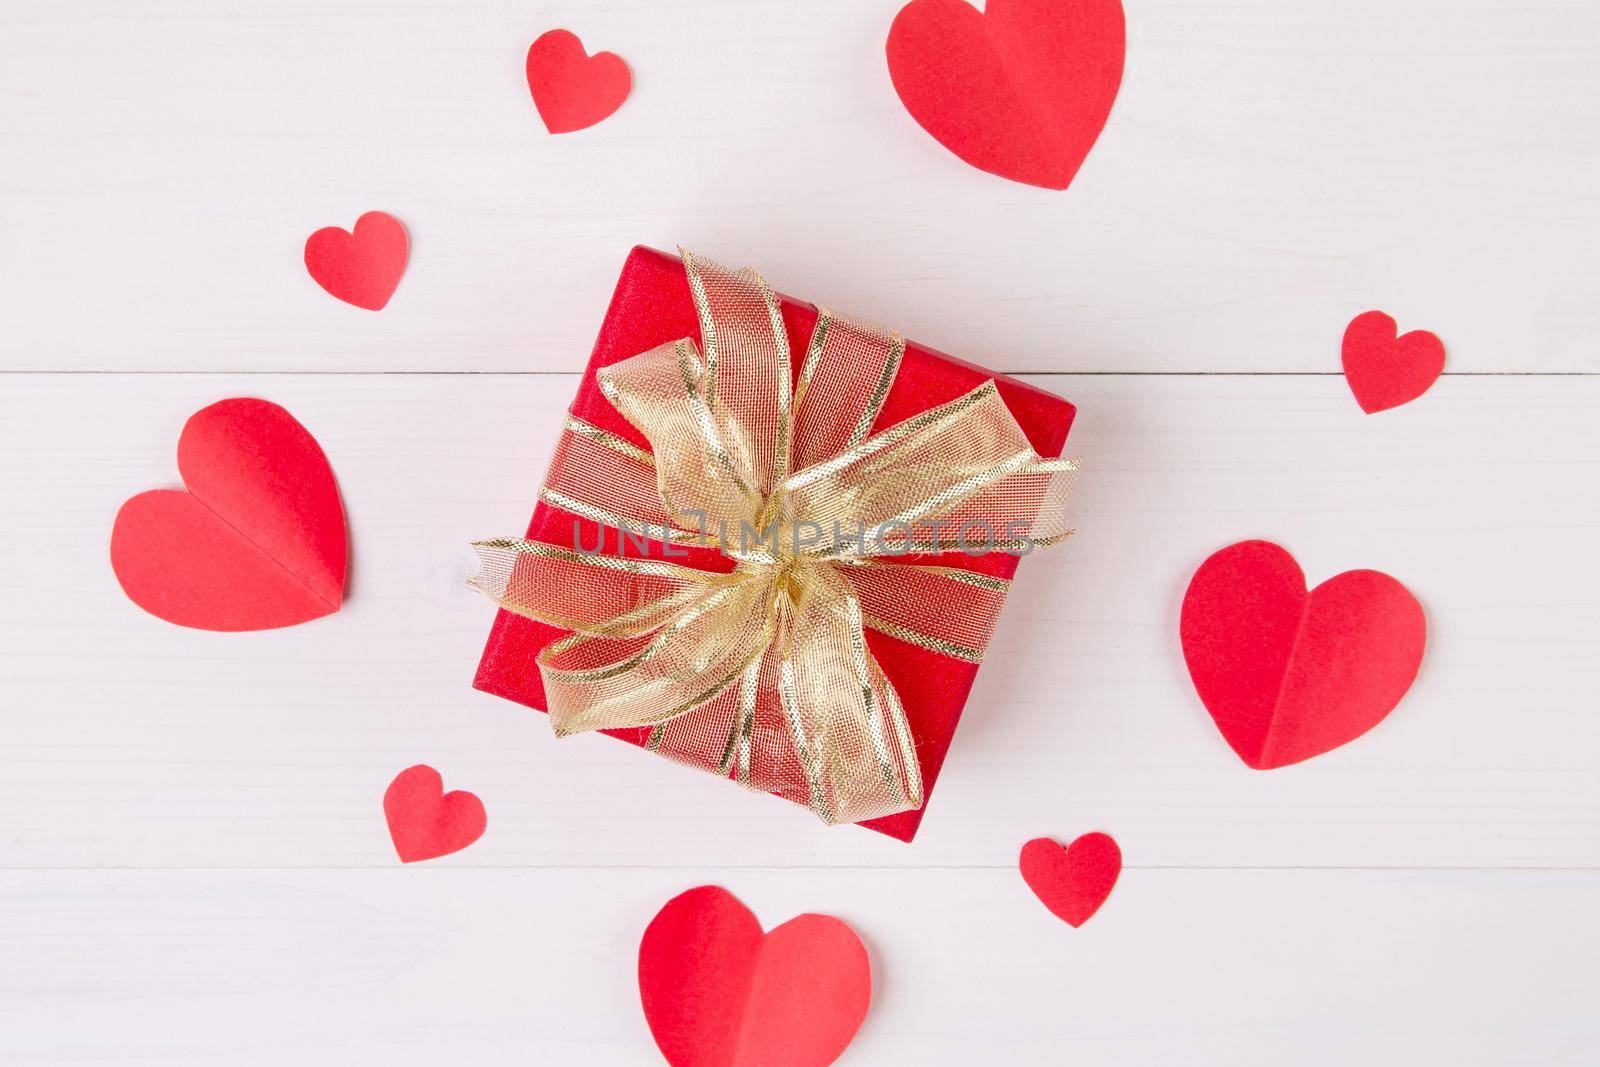 Gift box and heart shape paper on wooden table background, love and romance, presents in celebration and anniversary with surprise on desk, happy birthday, donate and charity, valentine day concept. by nnudoo